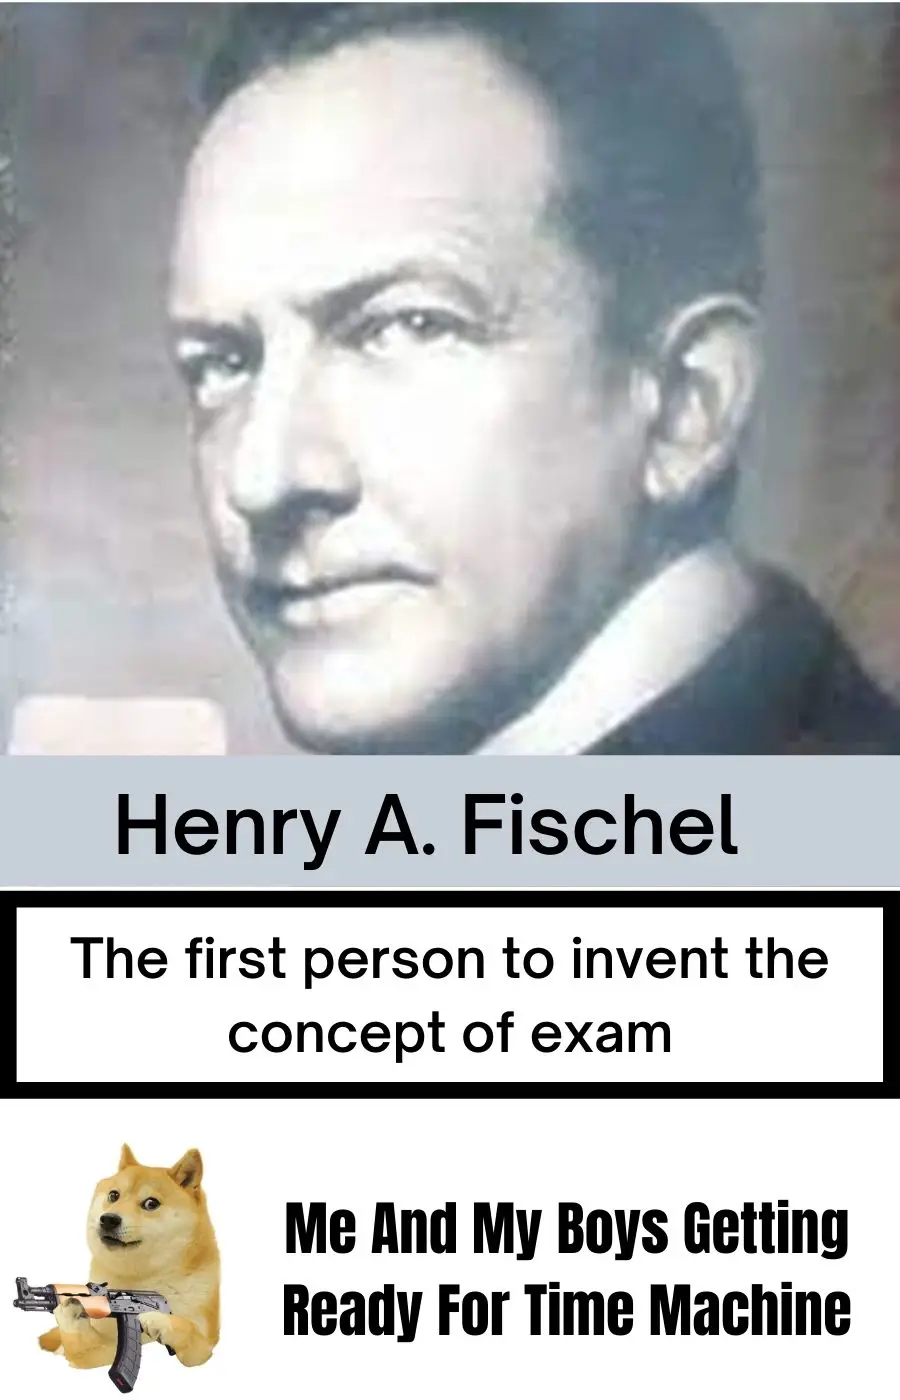 Who Invented Exams Meme on Henry A. Fischel